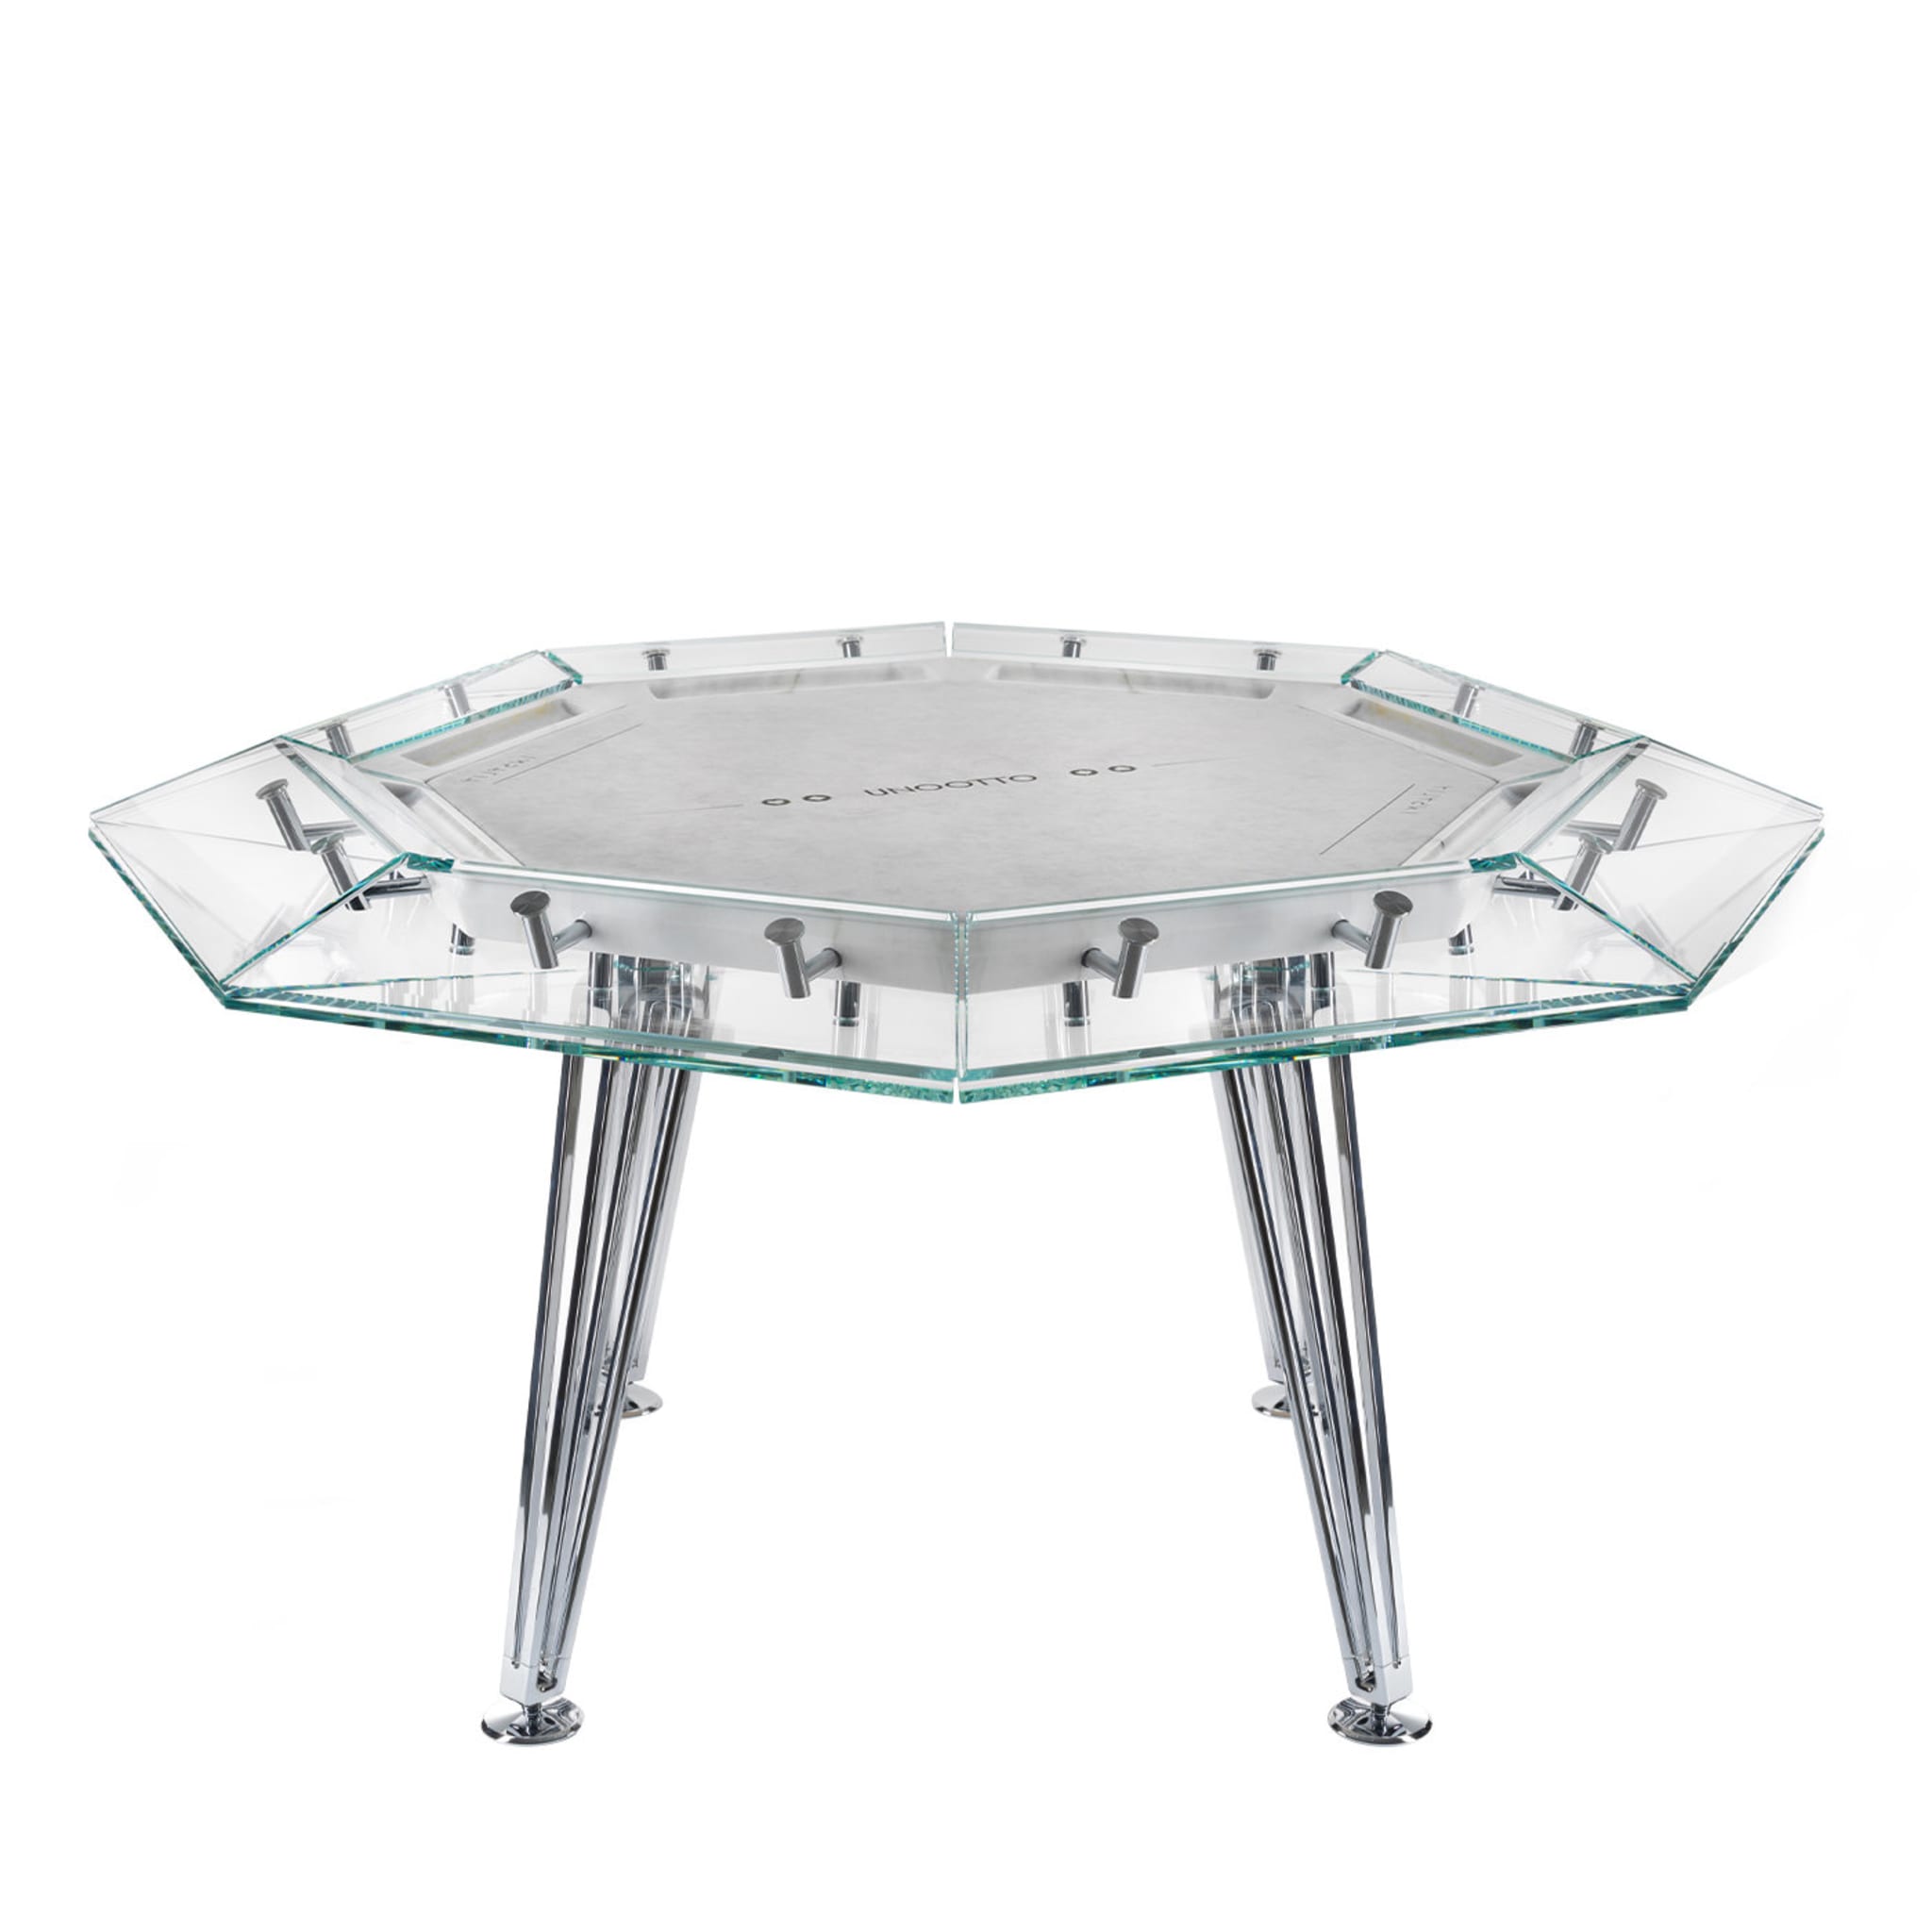 Unootto 8 Player Marble Edition White Poker Table - Main view